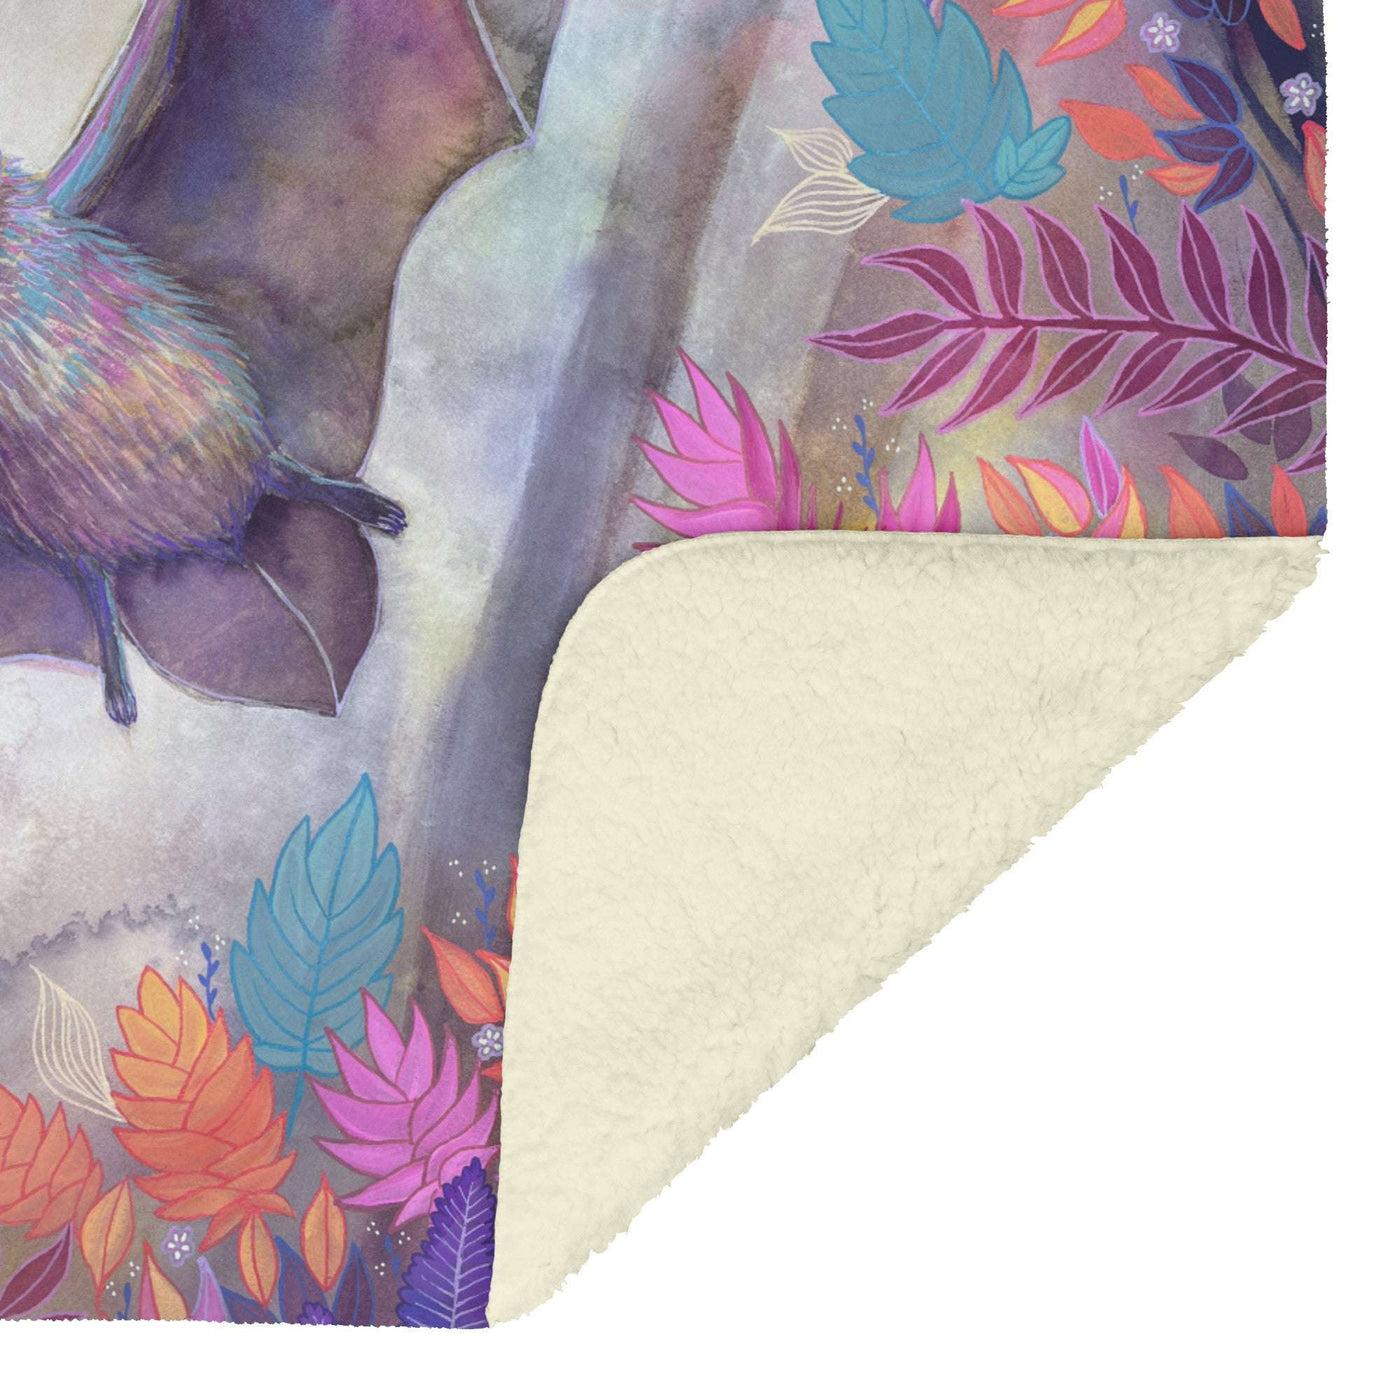 Colorful floral pattern on a Bat Blanket with a soft, white sherpa underside, partially folded to reveal texture.